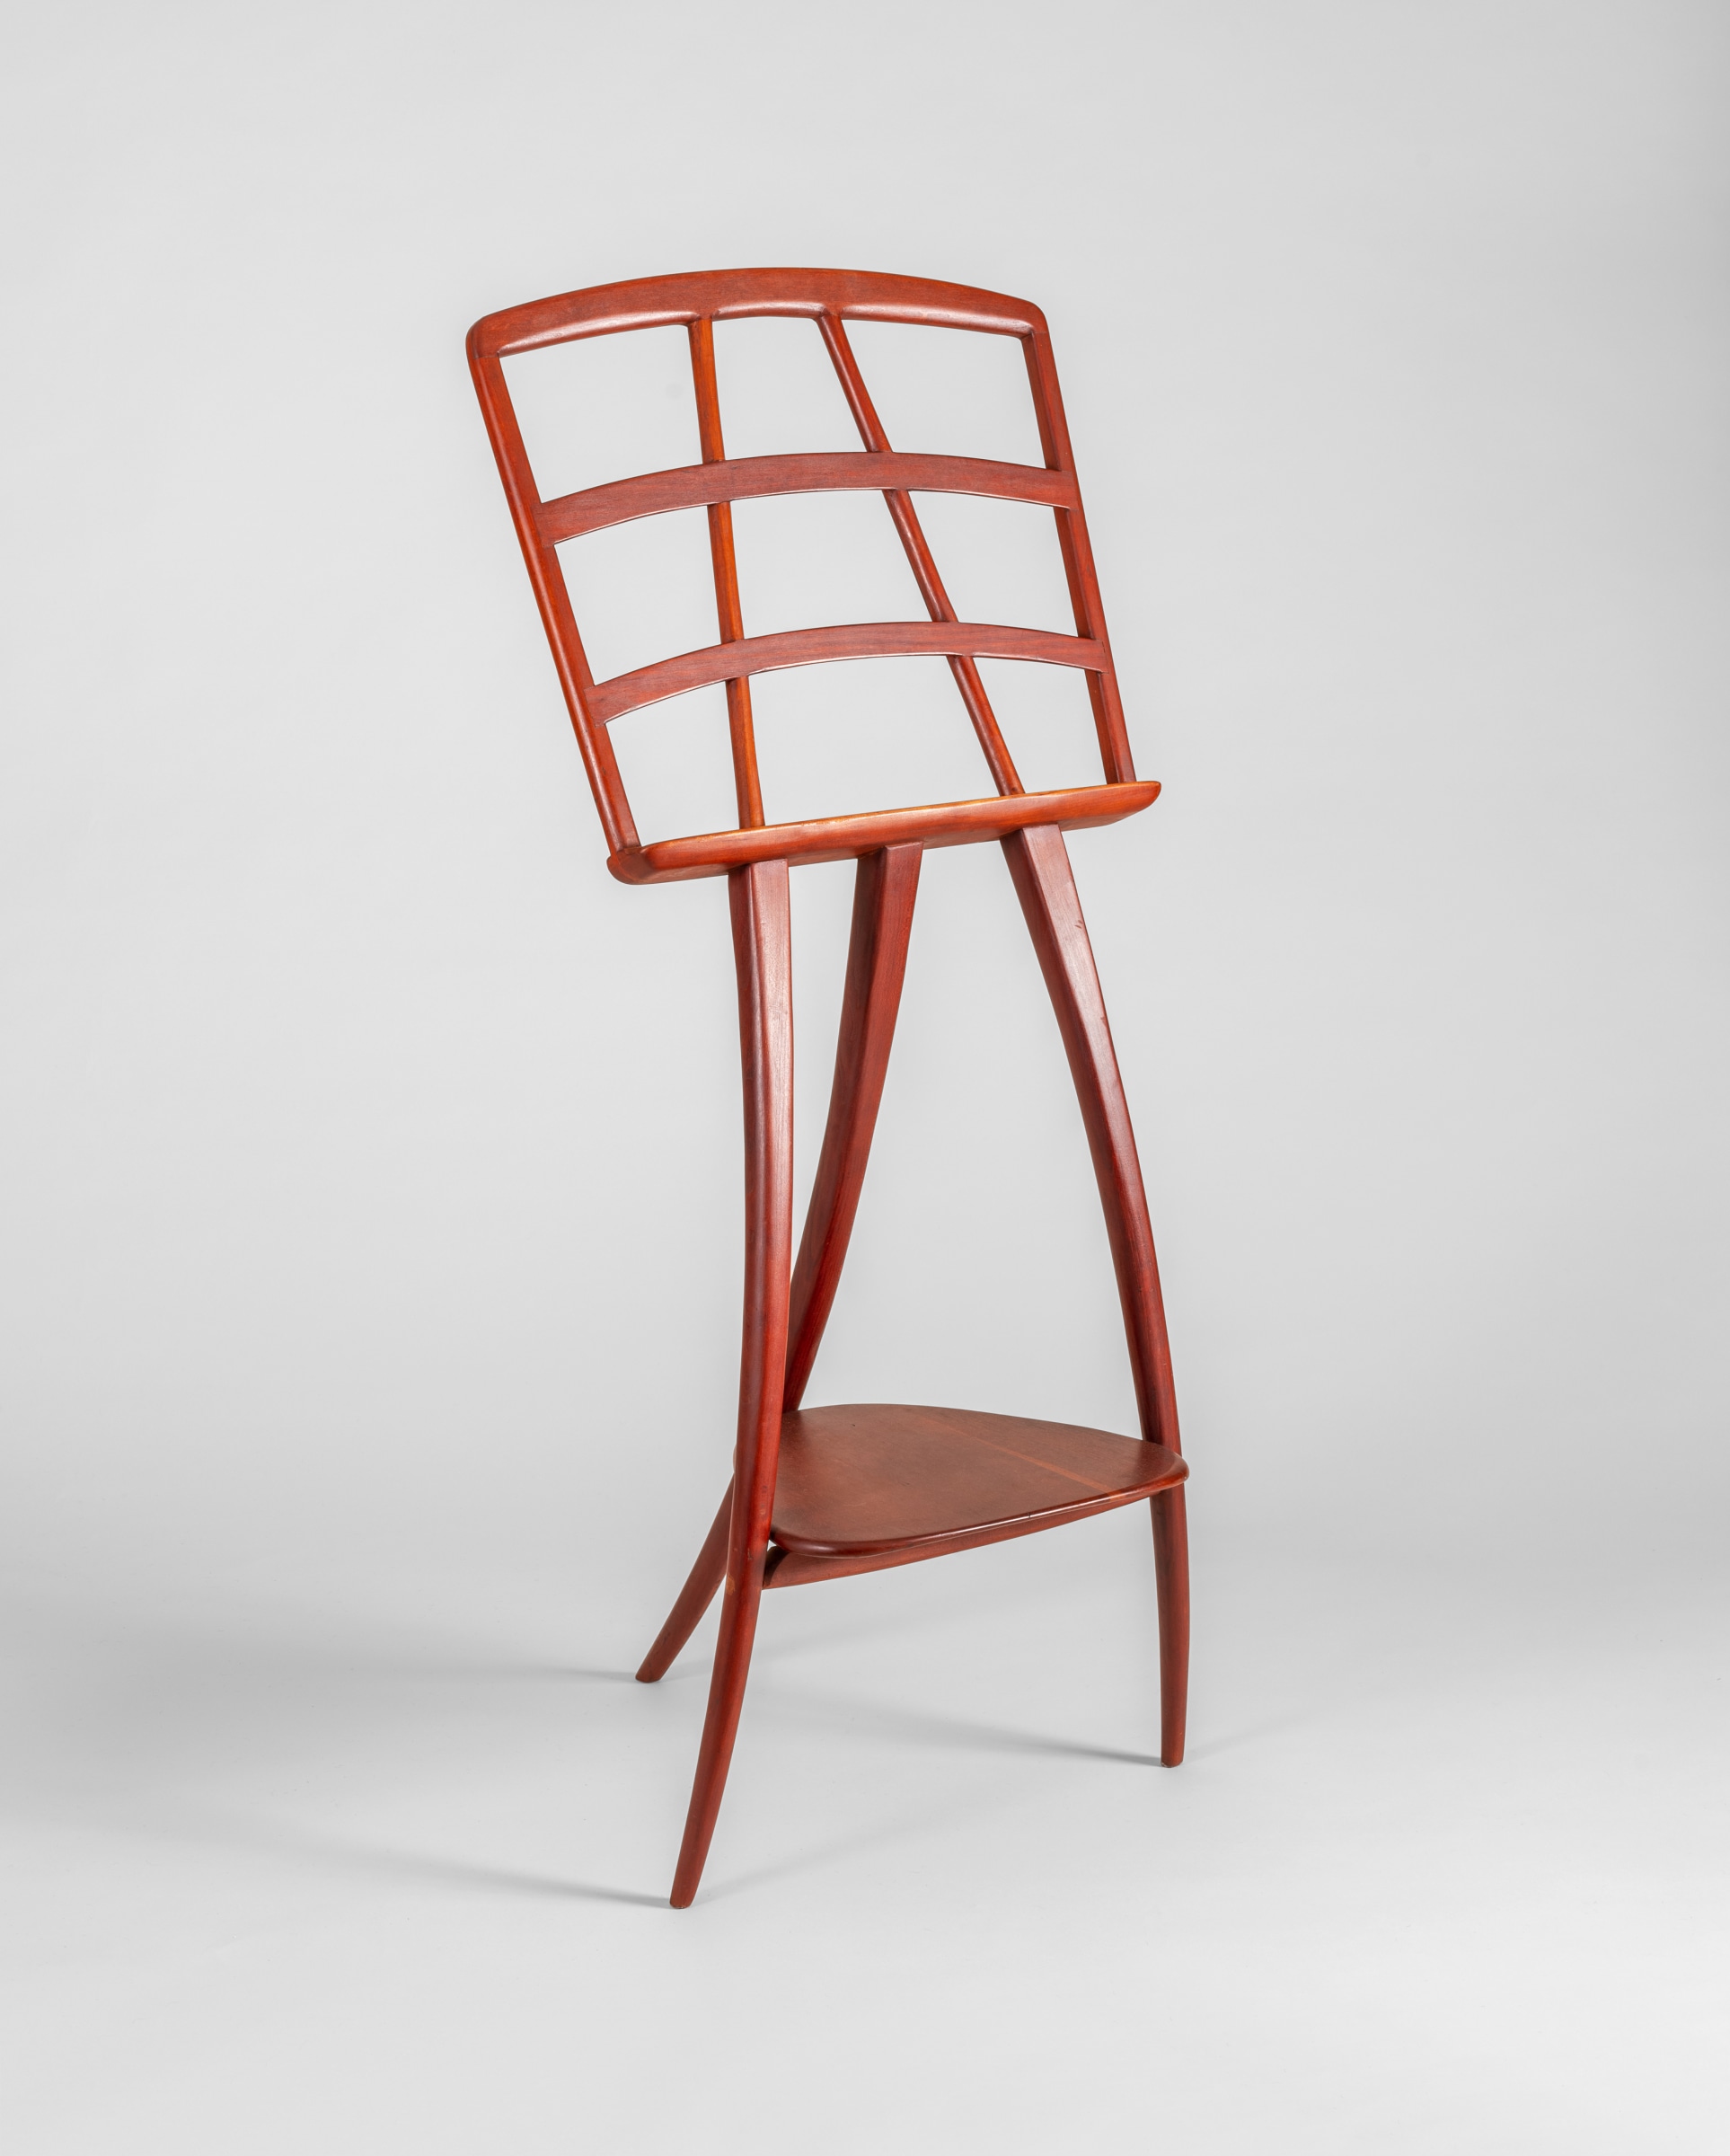 a music stand in the mid-century modern style by american studio craft designer wharton esherick, hand carved wood with soft smooth edges, tripod base